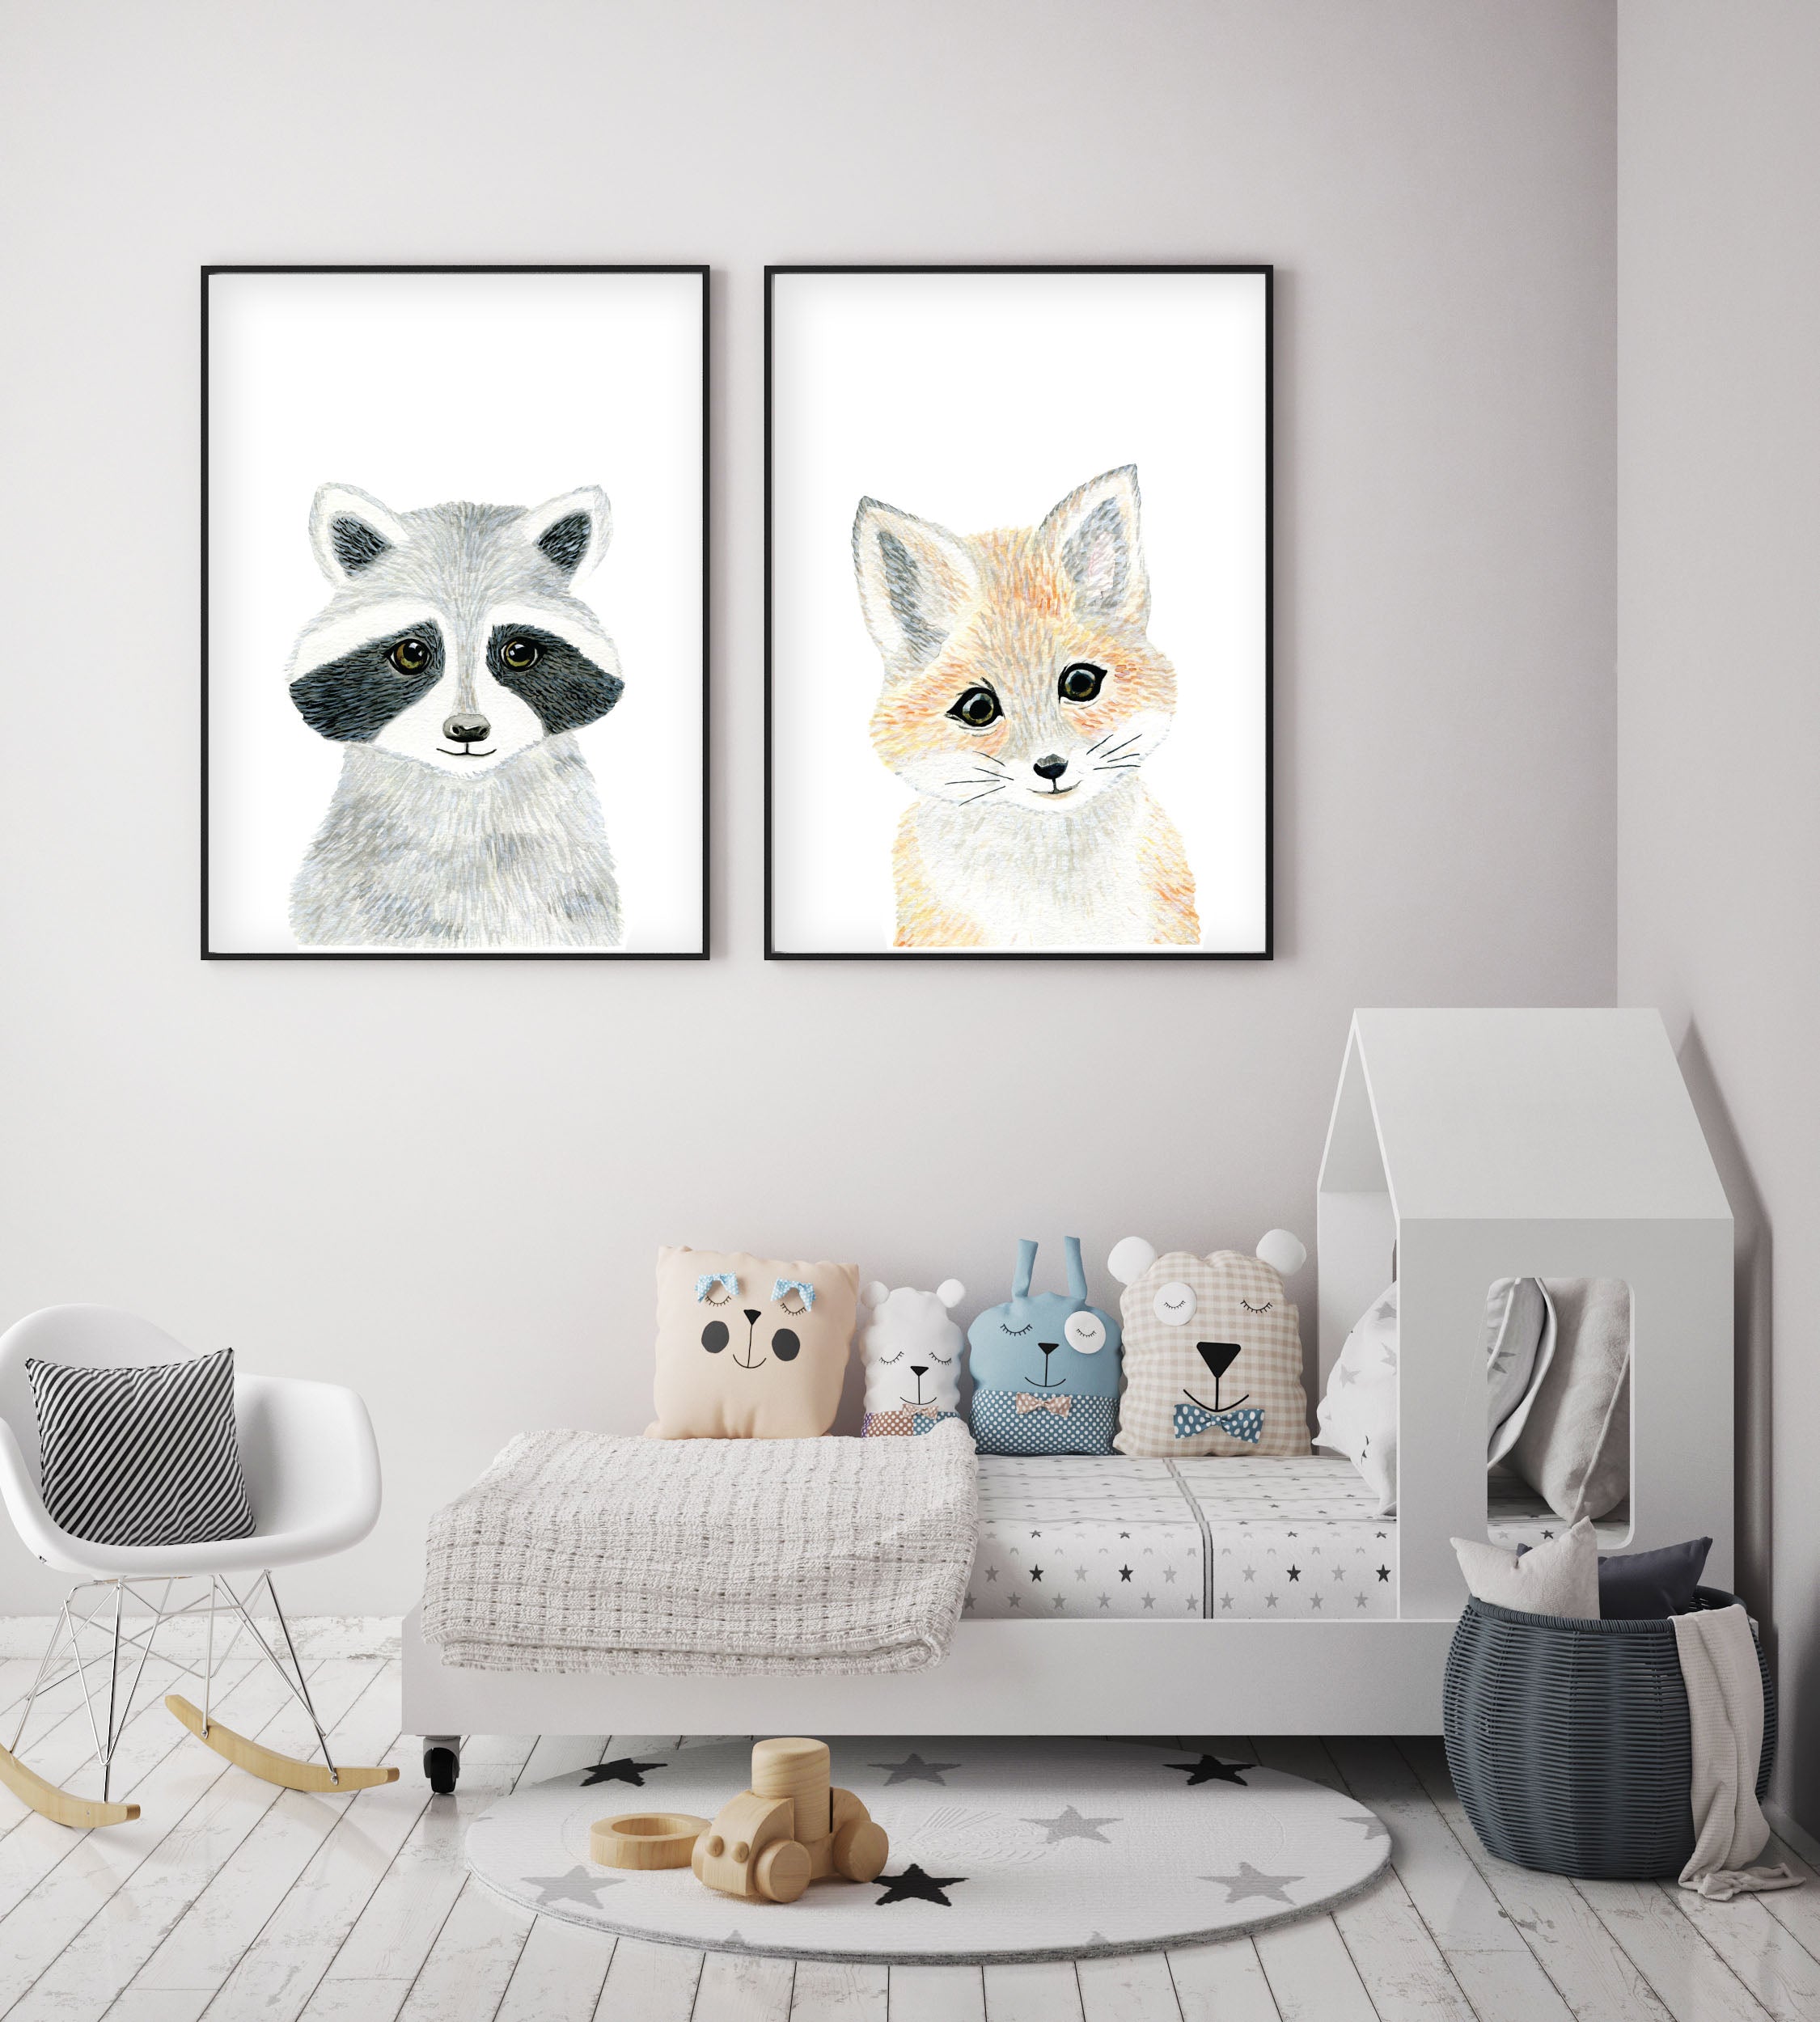 11x14 Canvas Print with Woodland Animals for Your Nursery or Kids